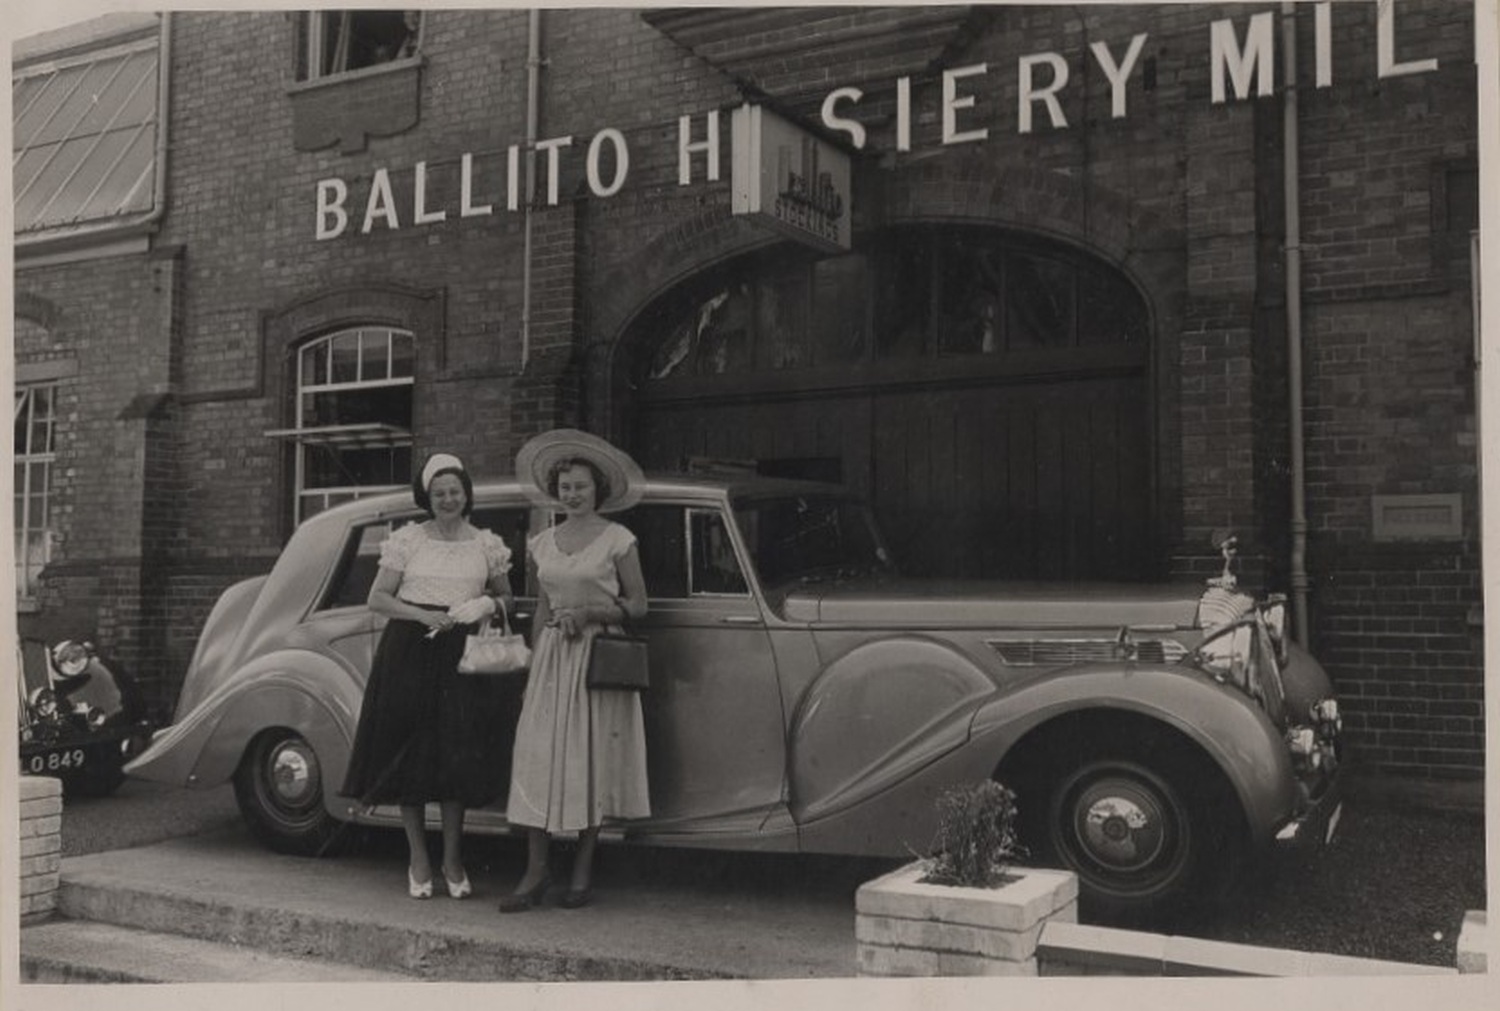 Two women stood in front of the Ballito building